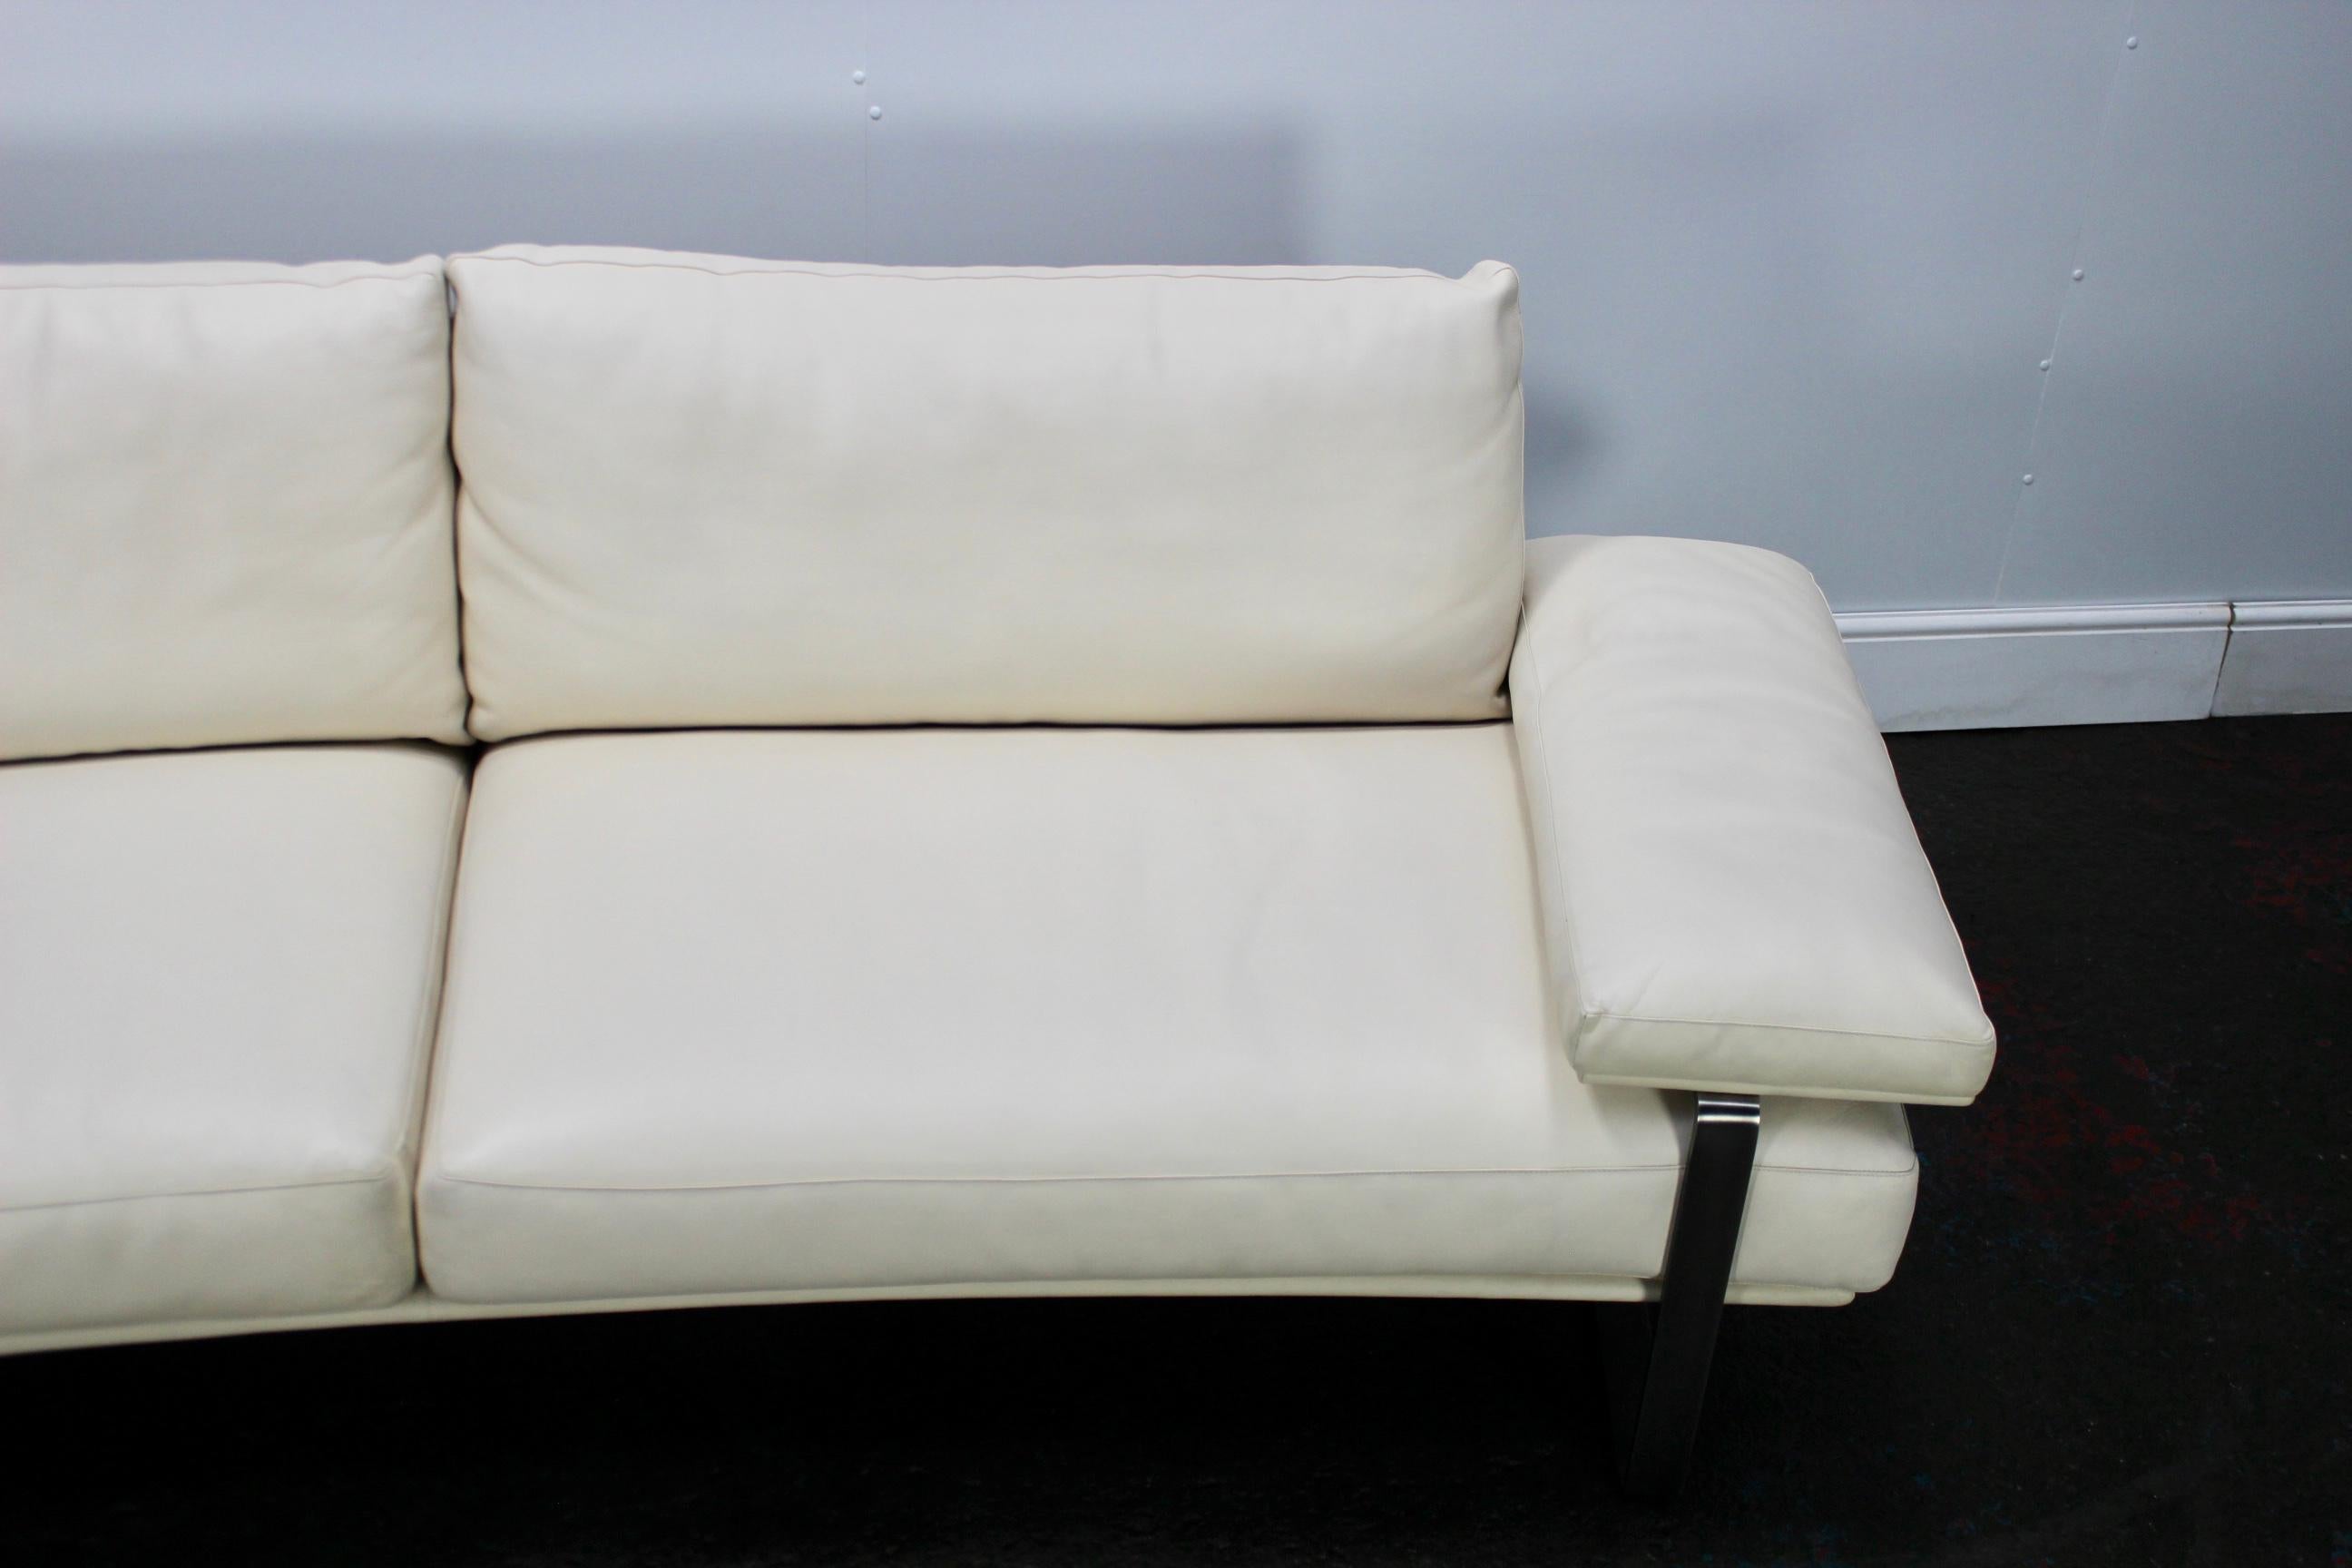 Molteni & C “Still SDC250” Curved Sofa in Ivory Leather In Good Condition For Sale In Barrowford, GB